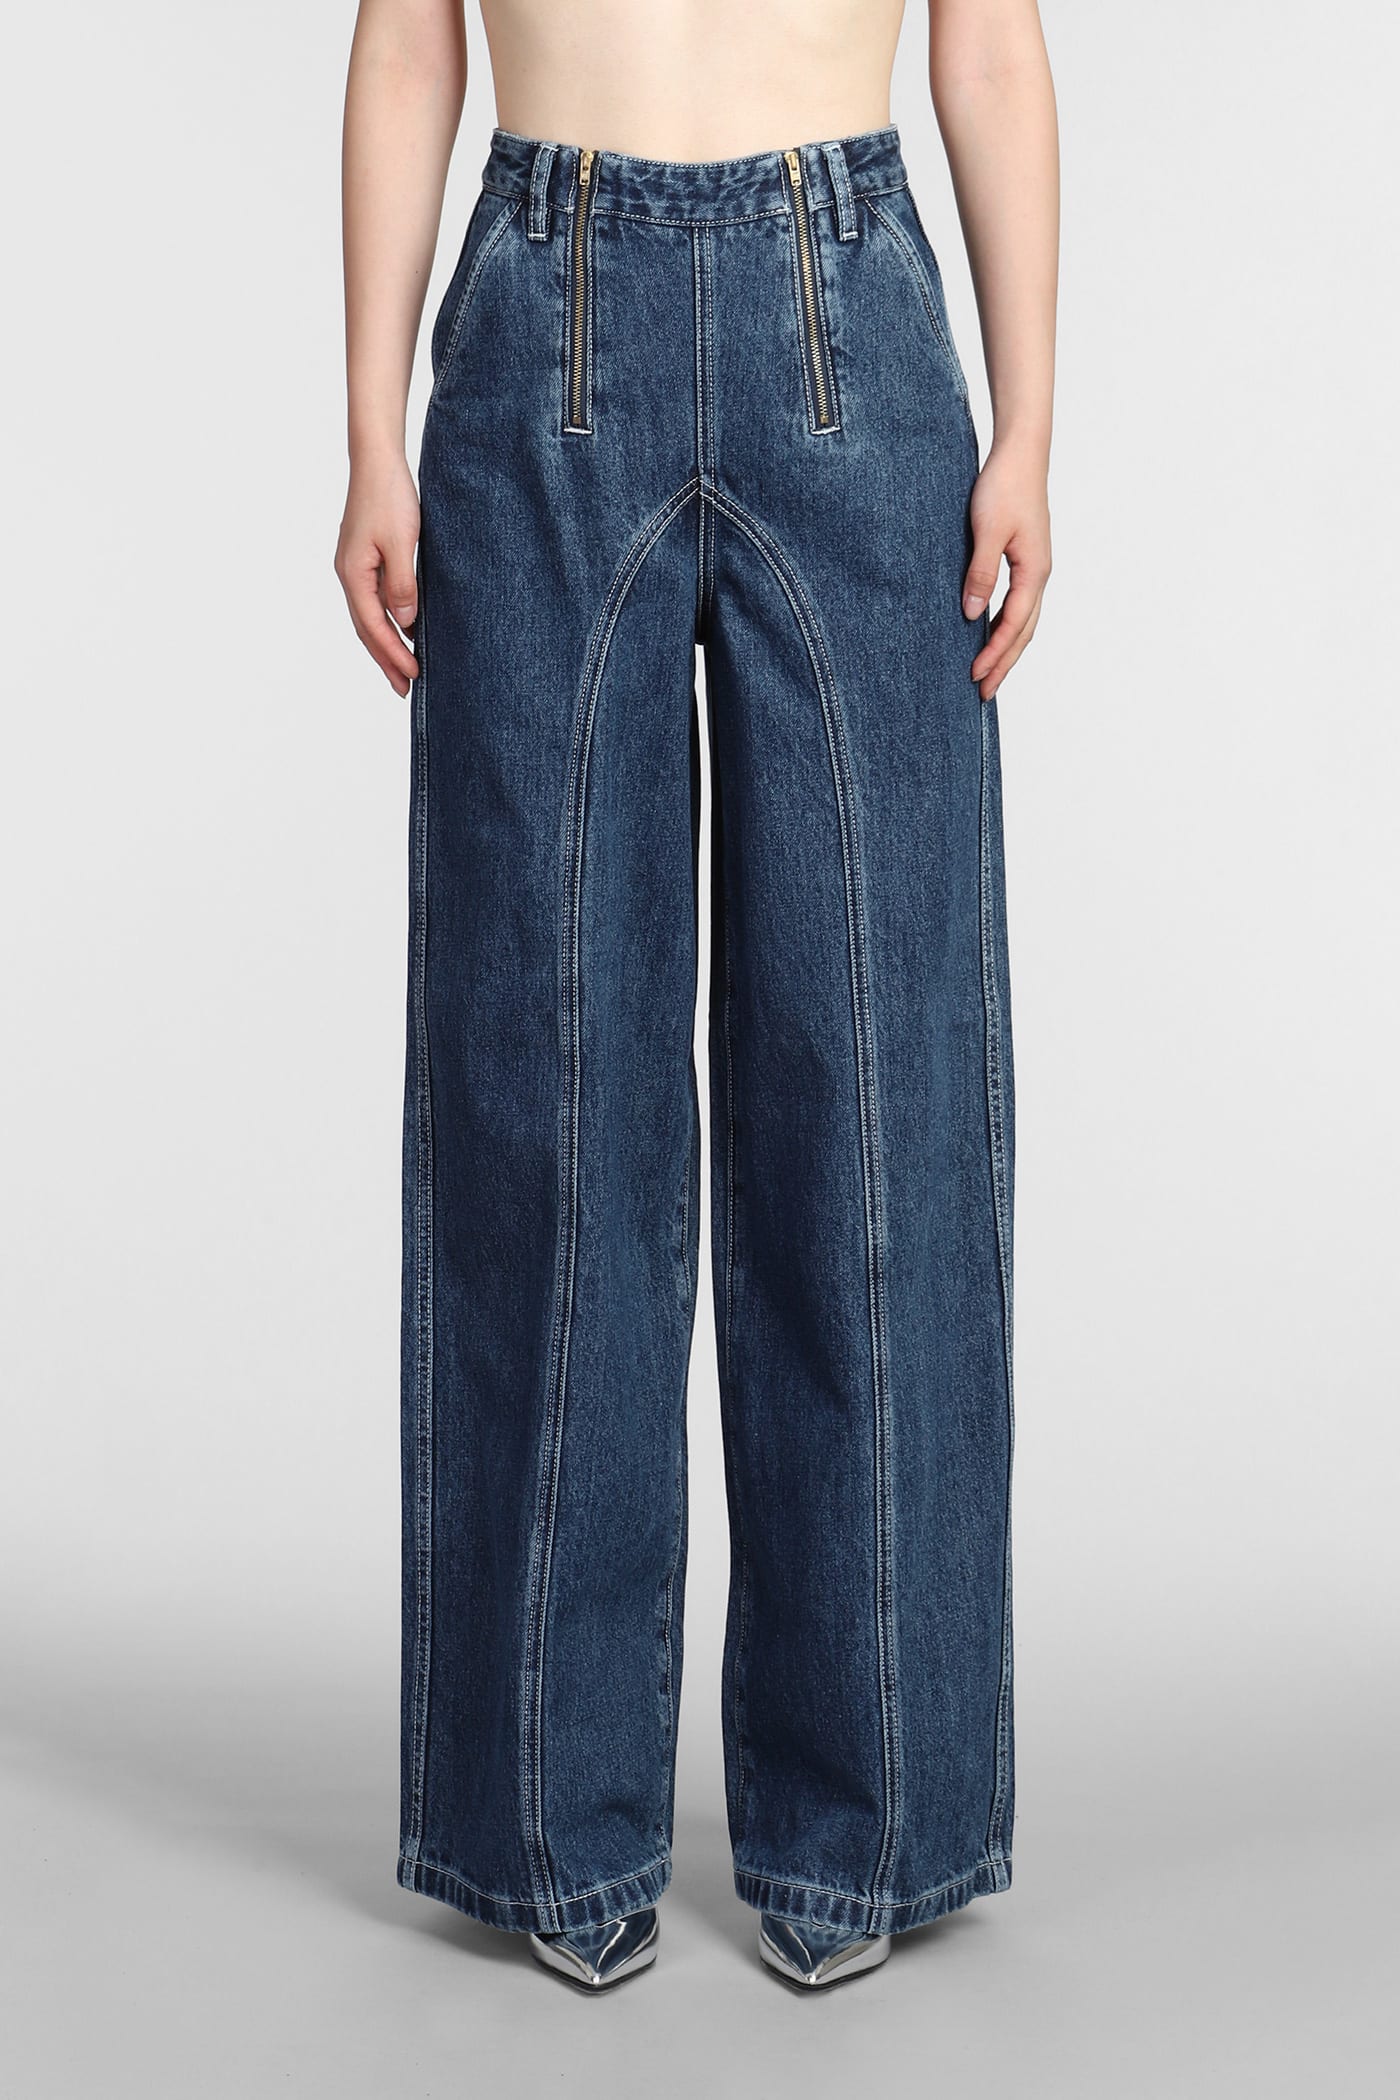 Jeans In Blue Cotton